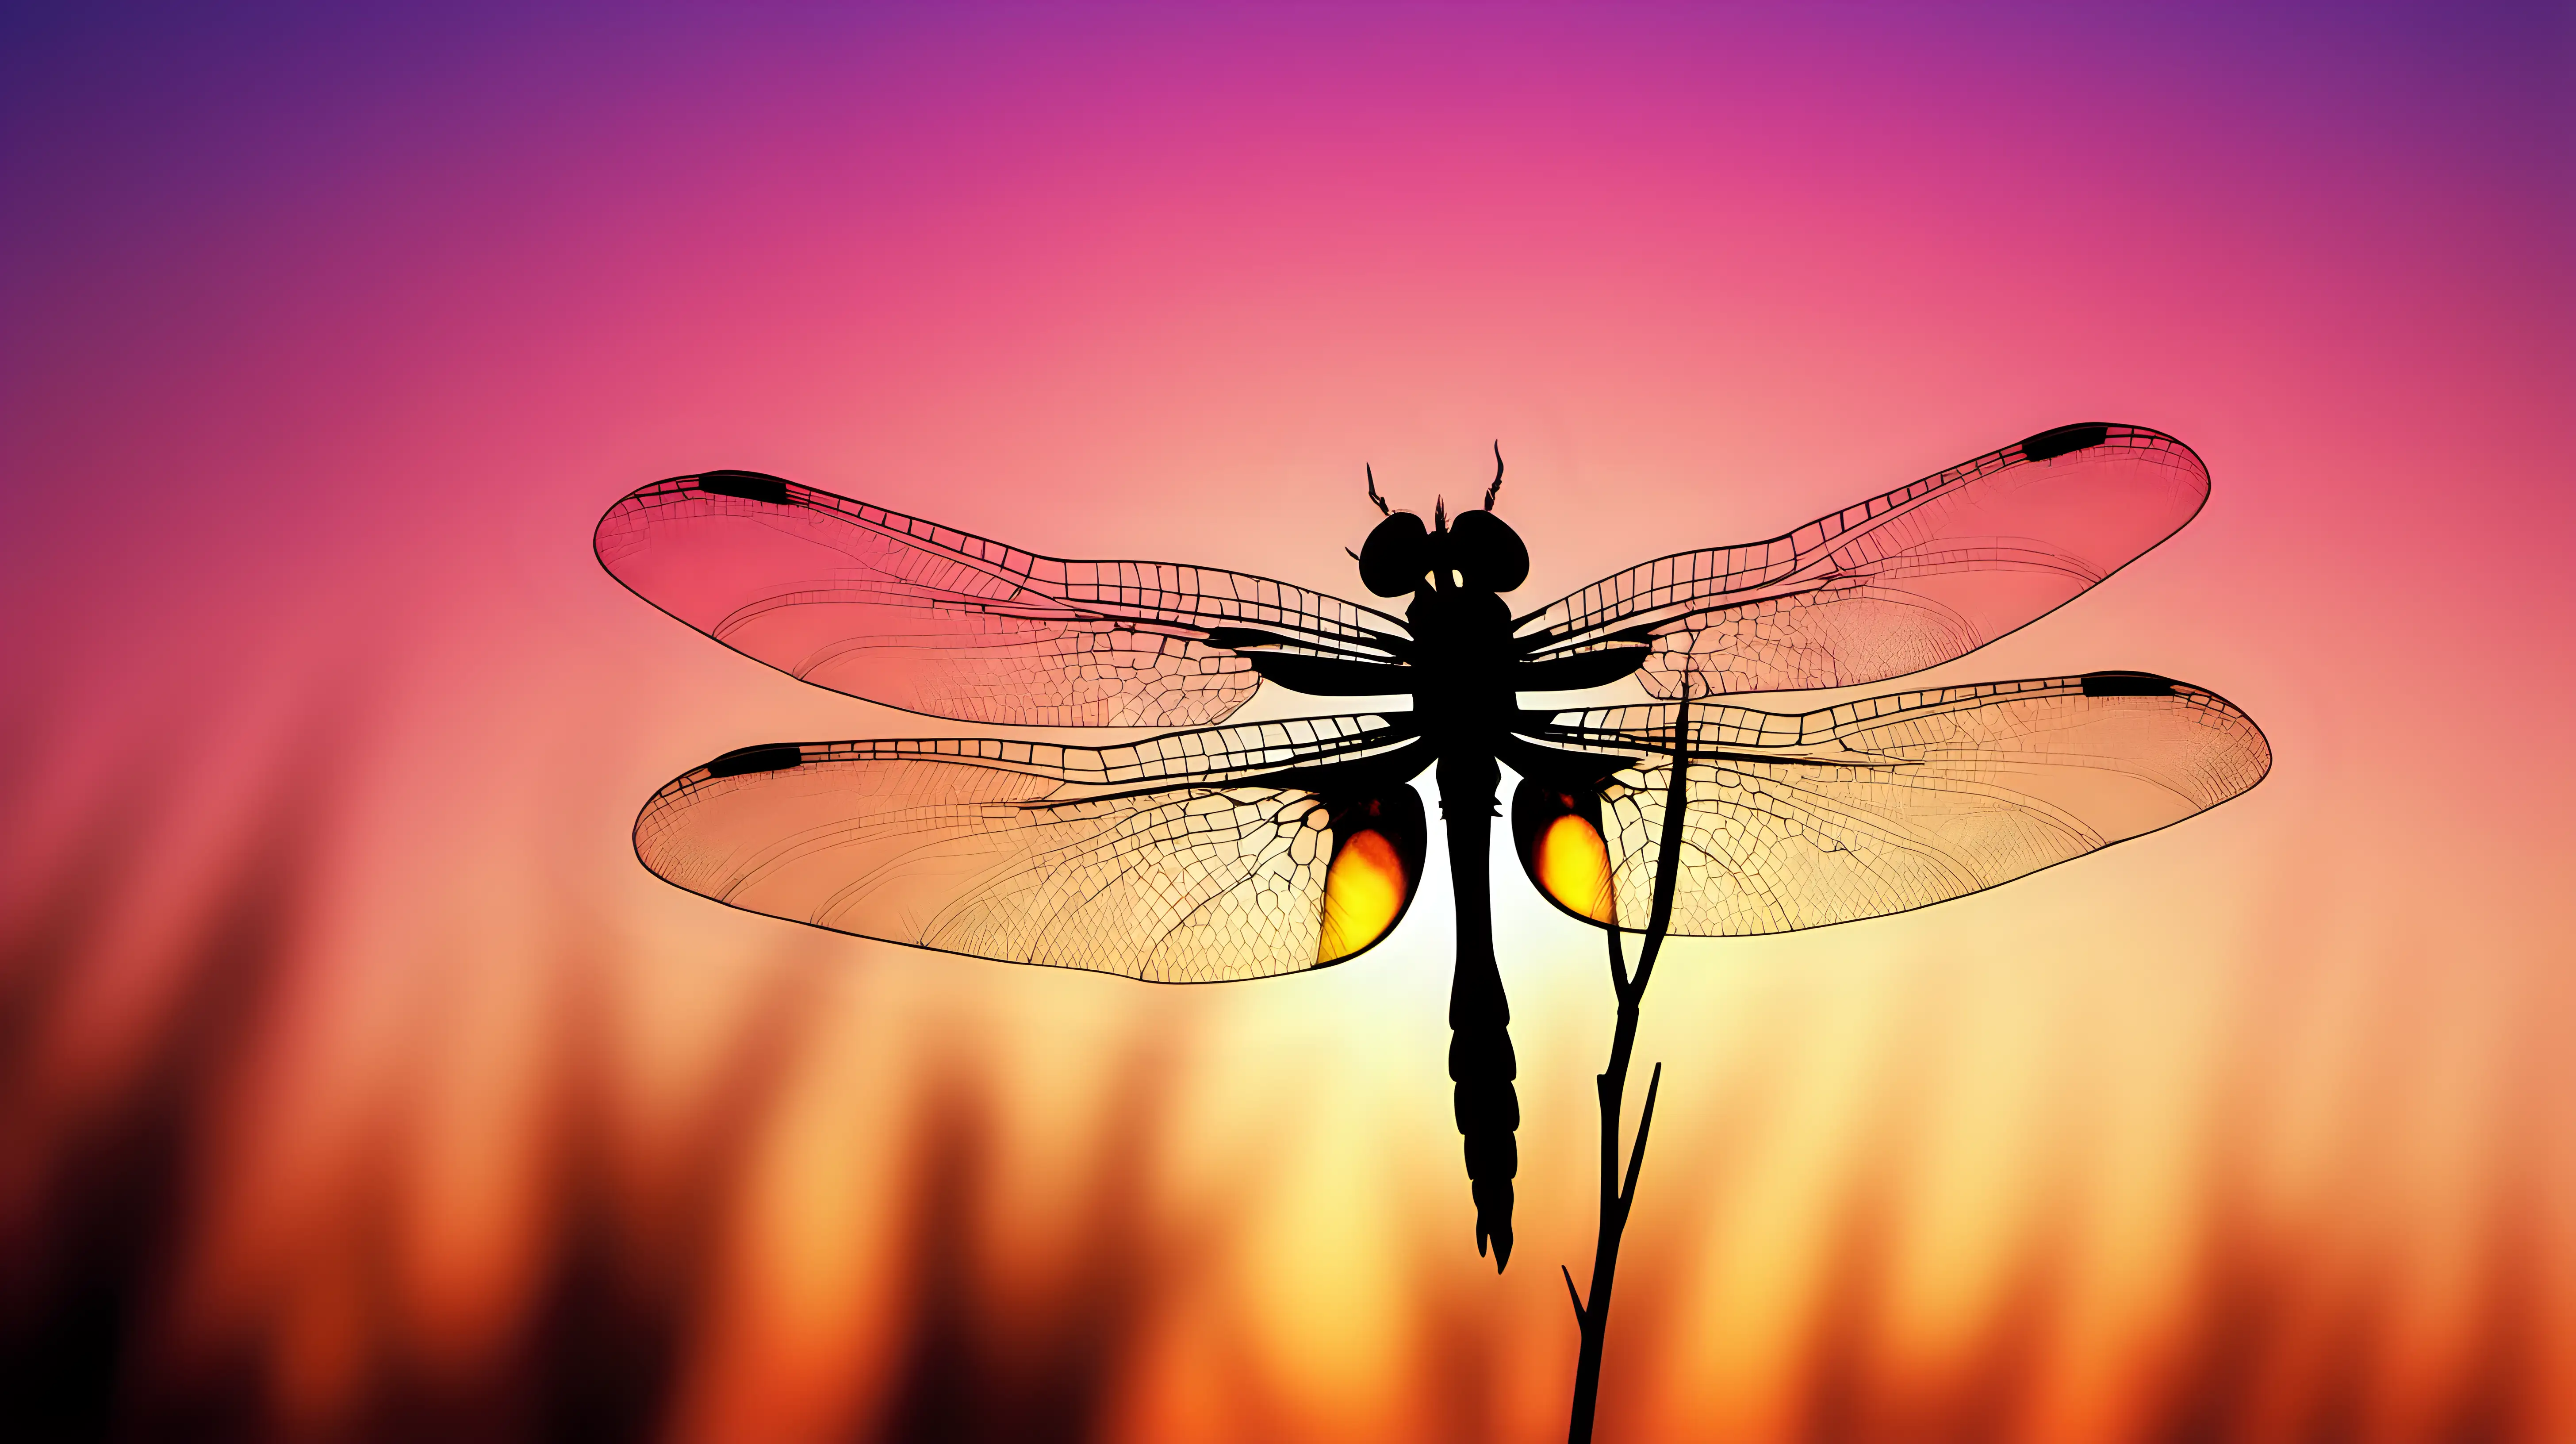 Serene Dragonfly Silhouette at Sunset